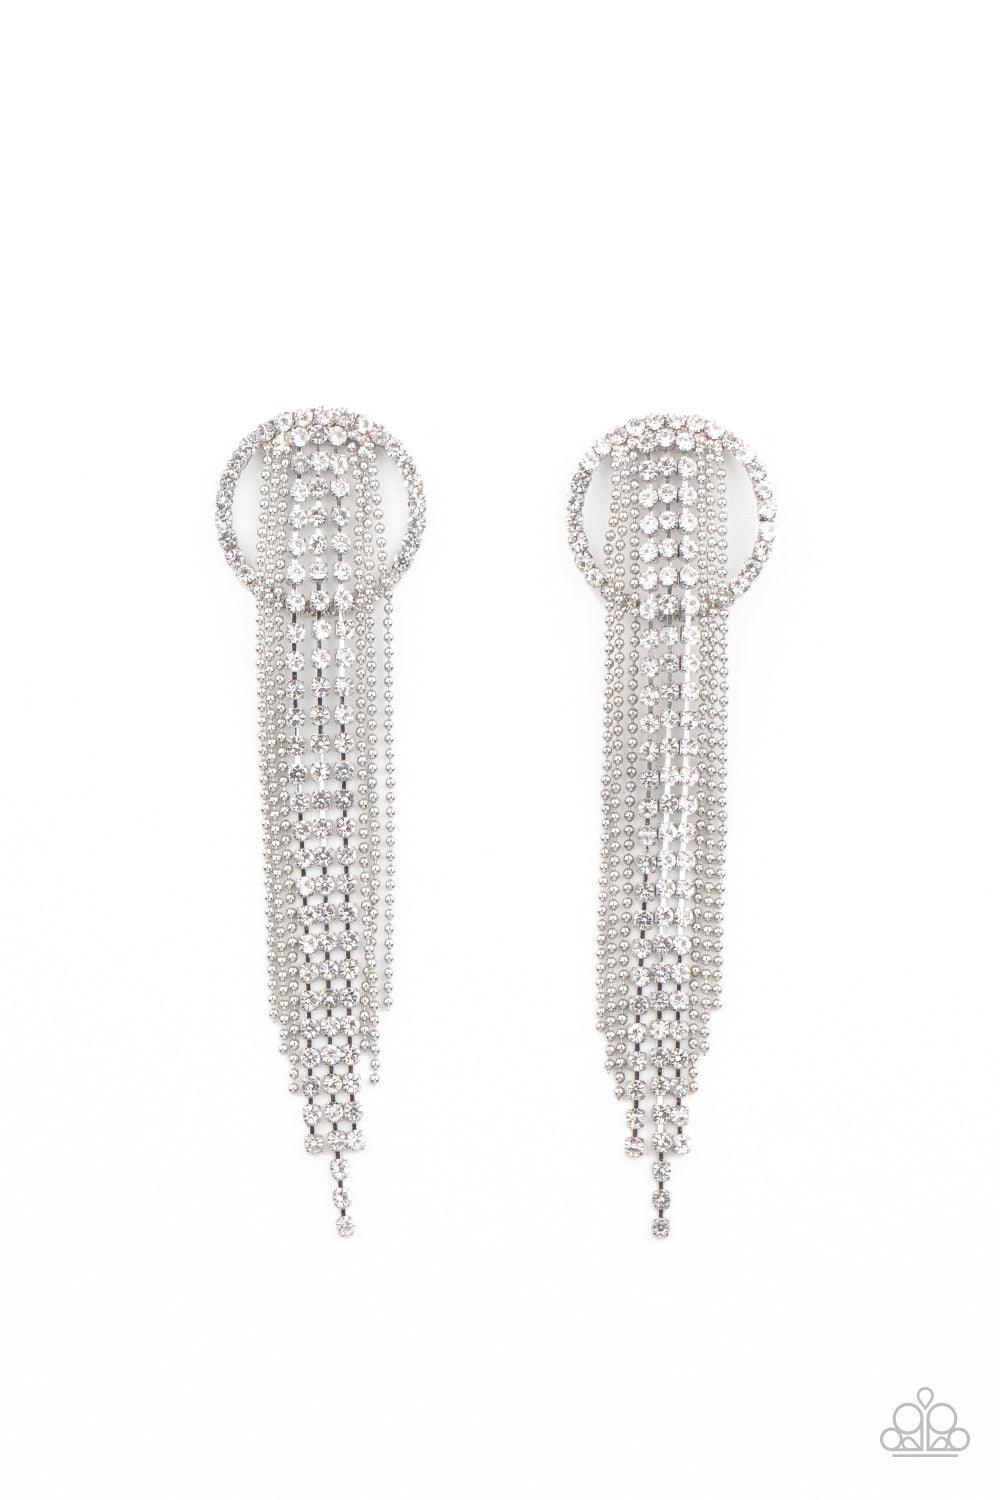 Paparazzi Accessories Dazzle By Default - White Dainty strands of glassy white rhinestones and shimmery silver ball-chain stream from the top of a bedazzled white rhinestone hoop, creating a dazzling fringe. Earring attaches to a standard post fitting. So